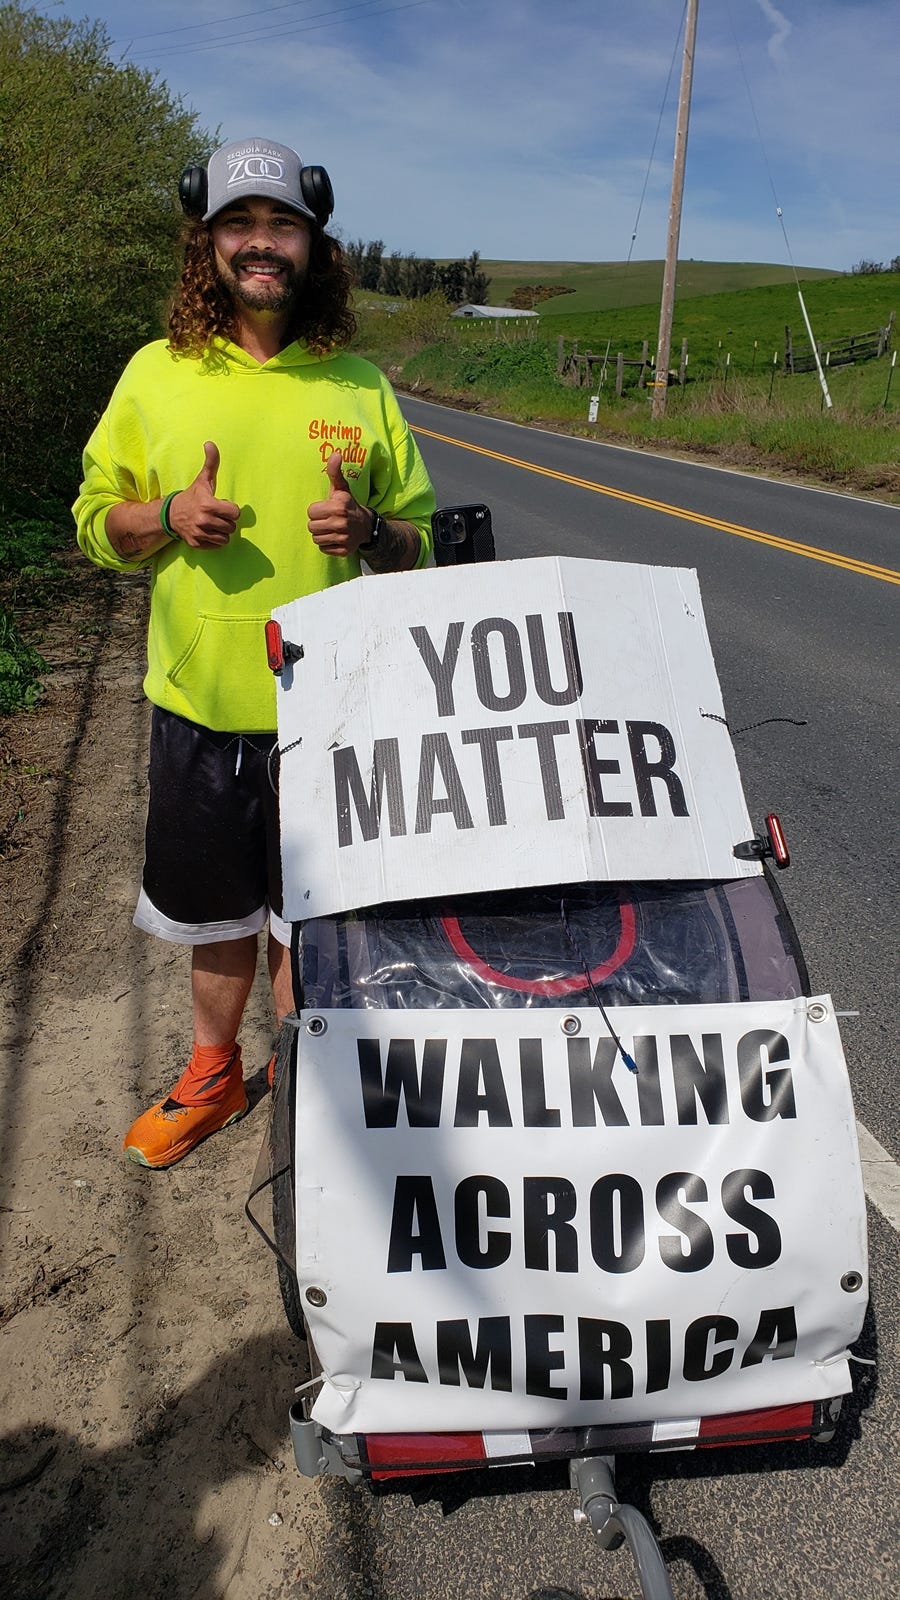 A young white man with curly shoulder-length hair wearing a ball cap, headphones, a green flourscent shirt, pushing a cart with 2 signs - one says You Matter, the other says Walking Across America